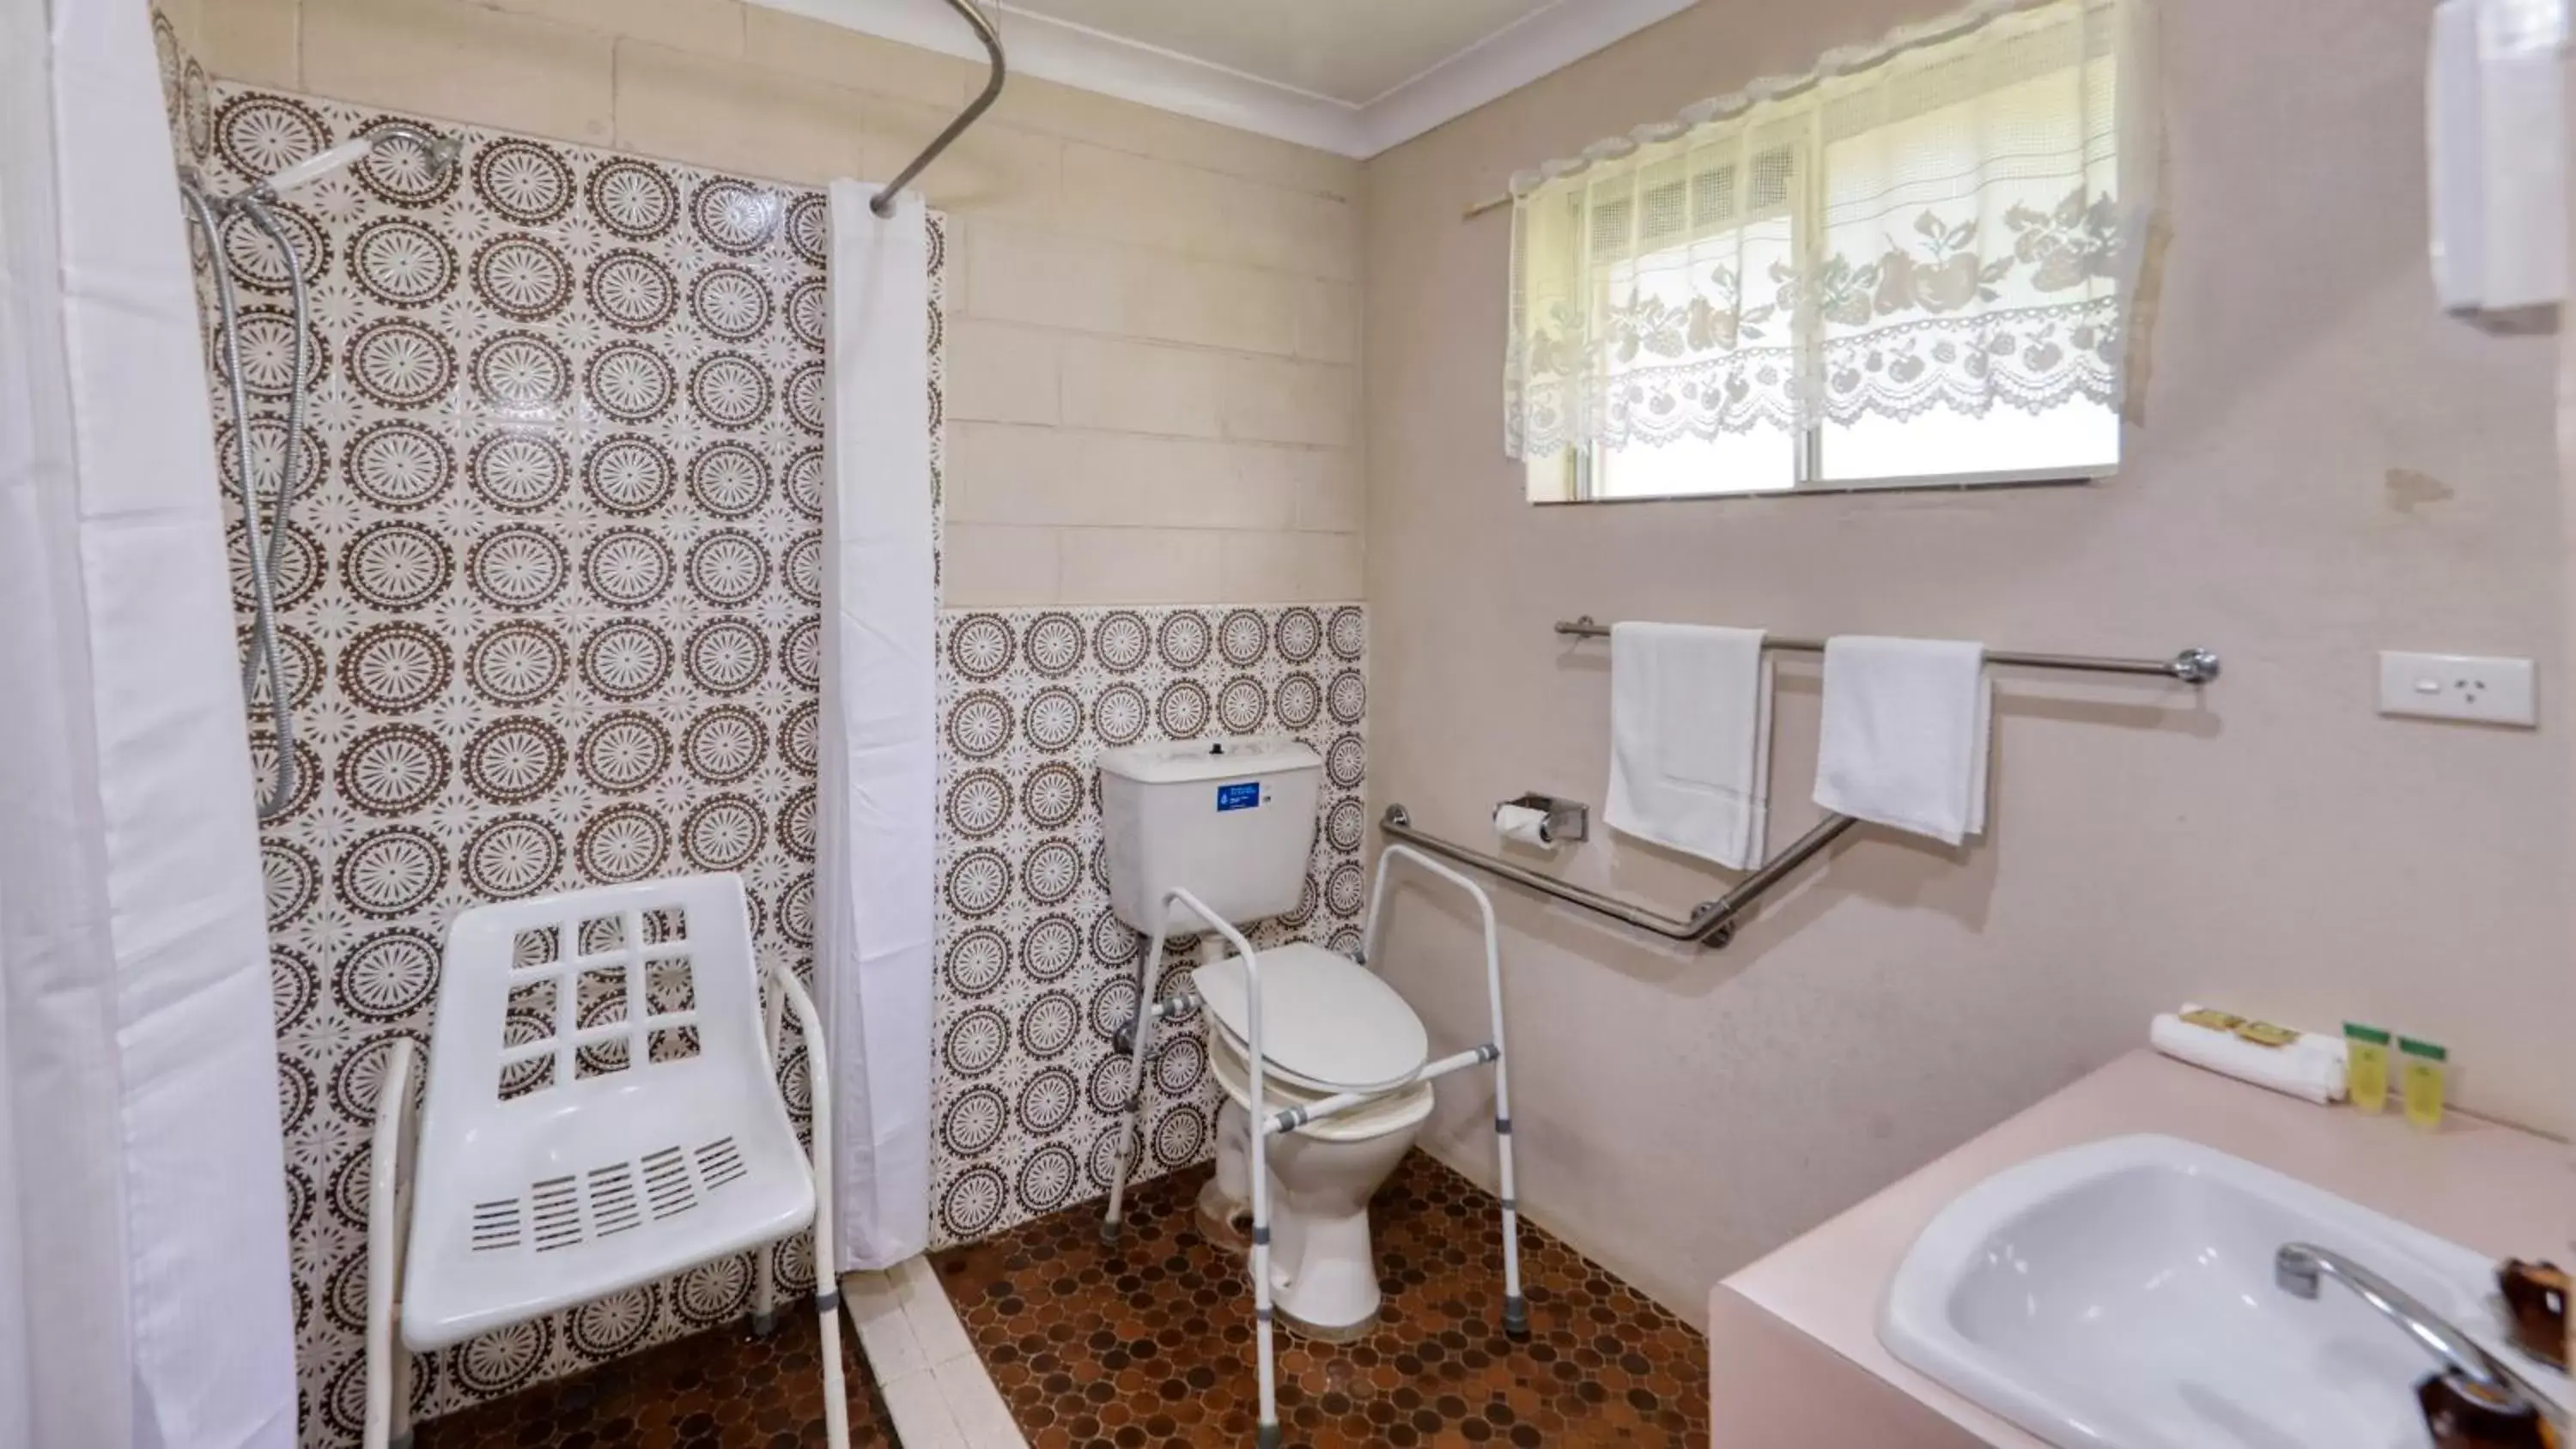 Facility for disabled guests, Bathroom in Matthew Flinders Motor Inn